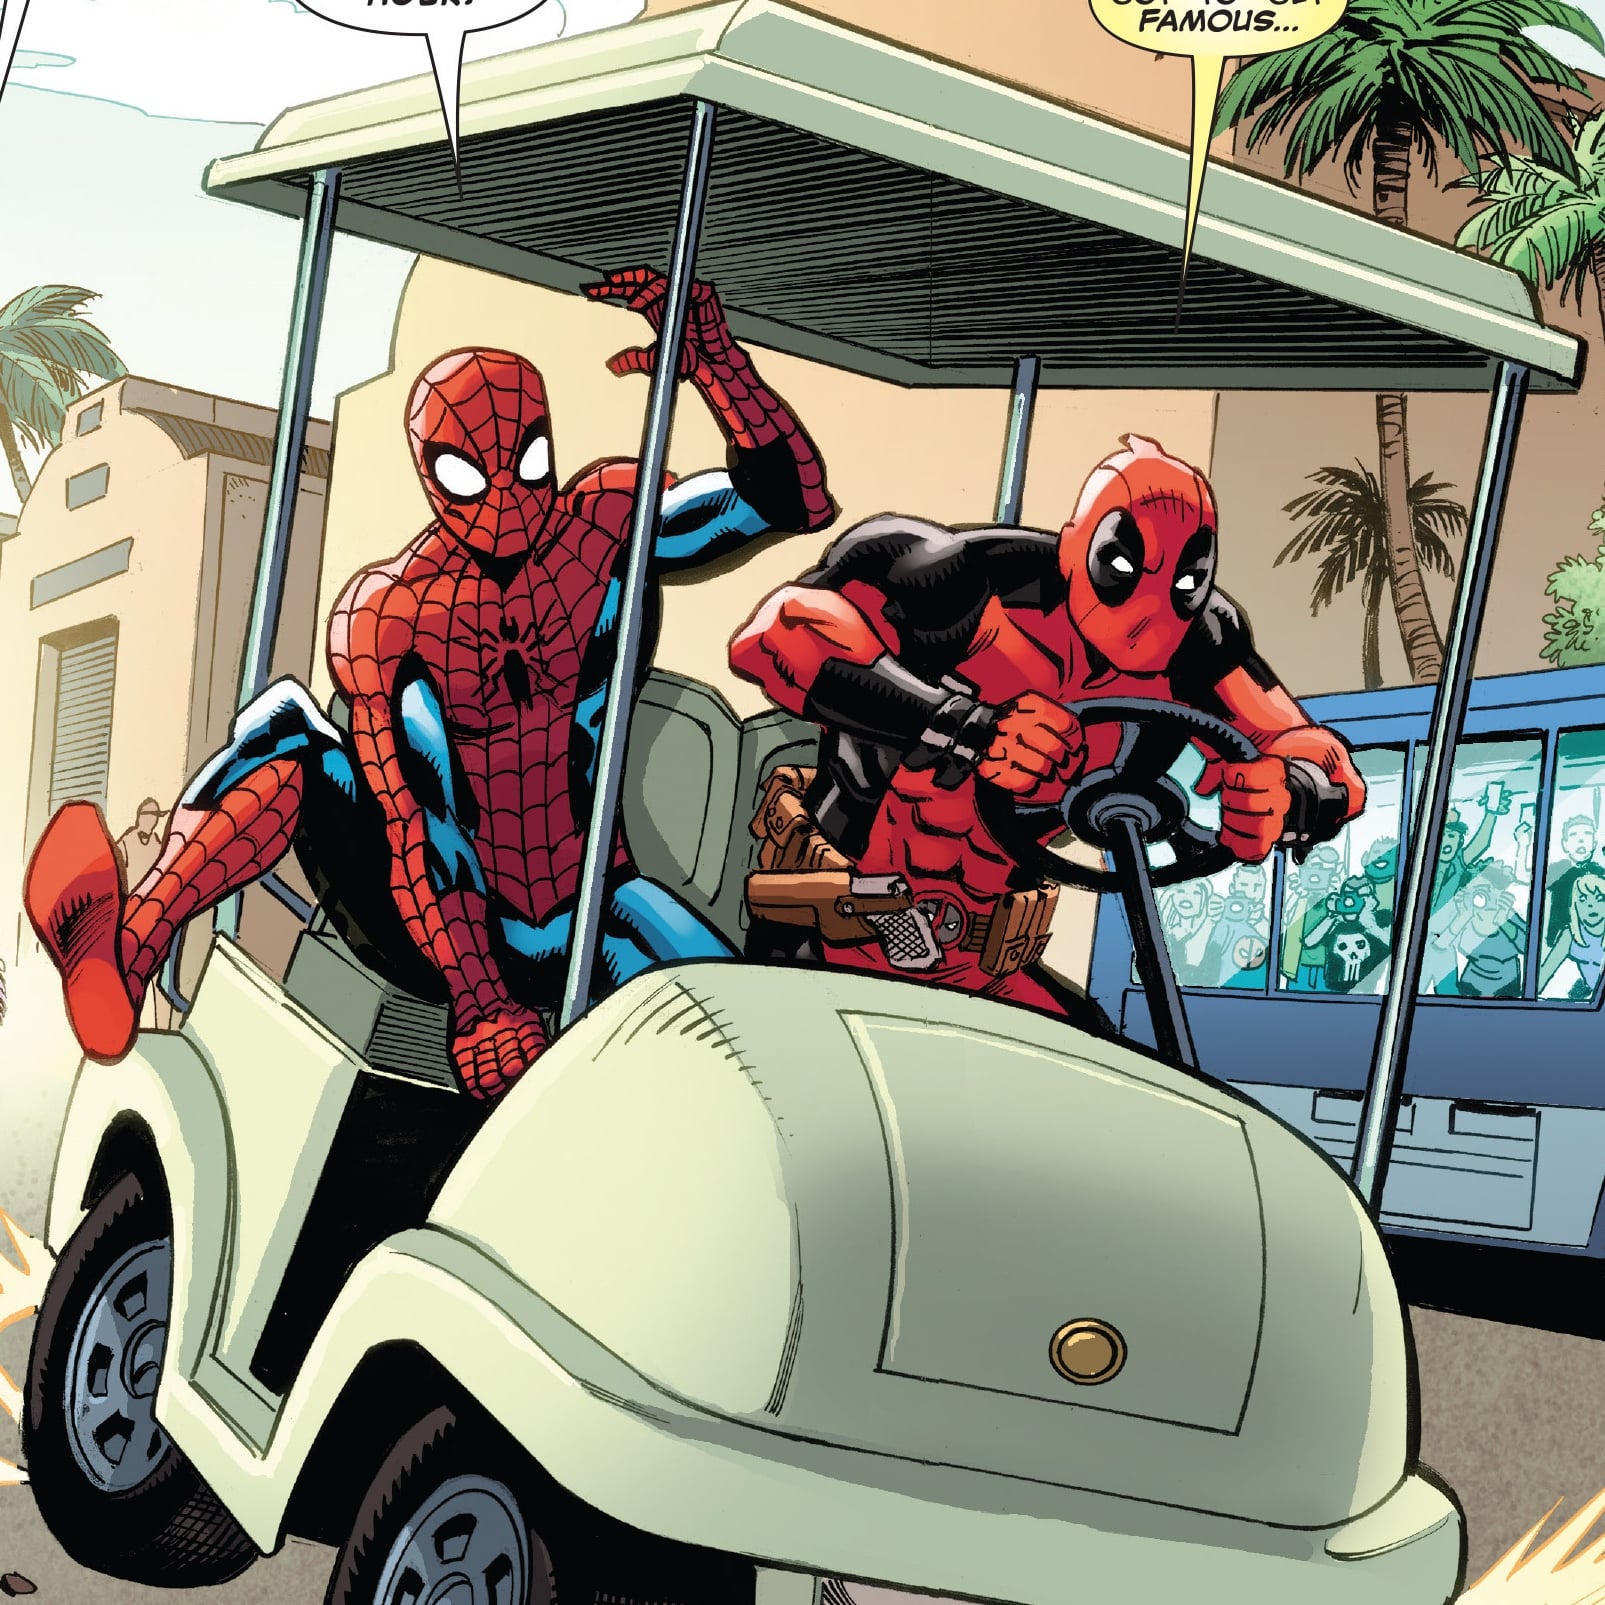 Marvel Calls Out DC In The Pages Of 'Spider-Man/Deadpool' Comic